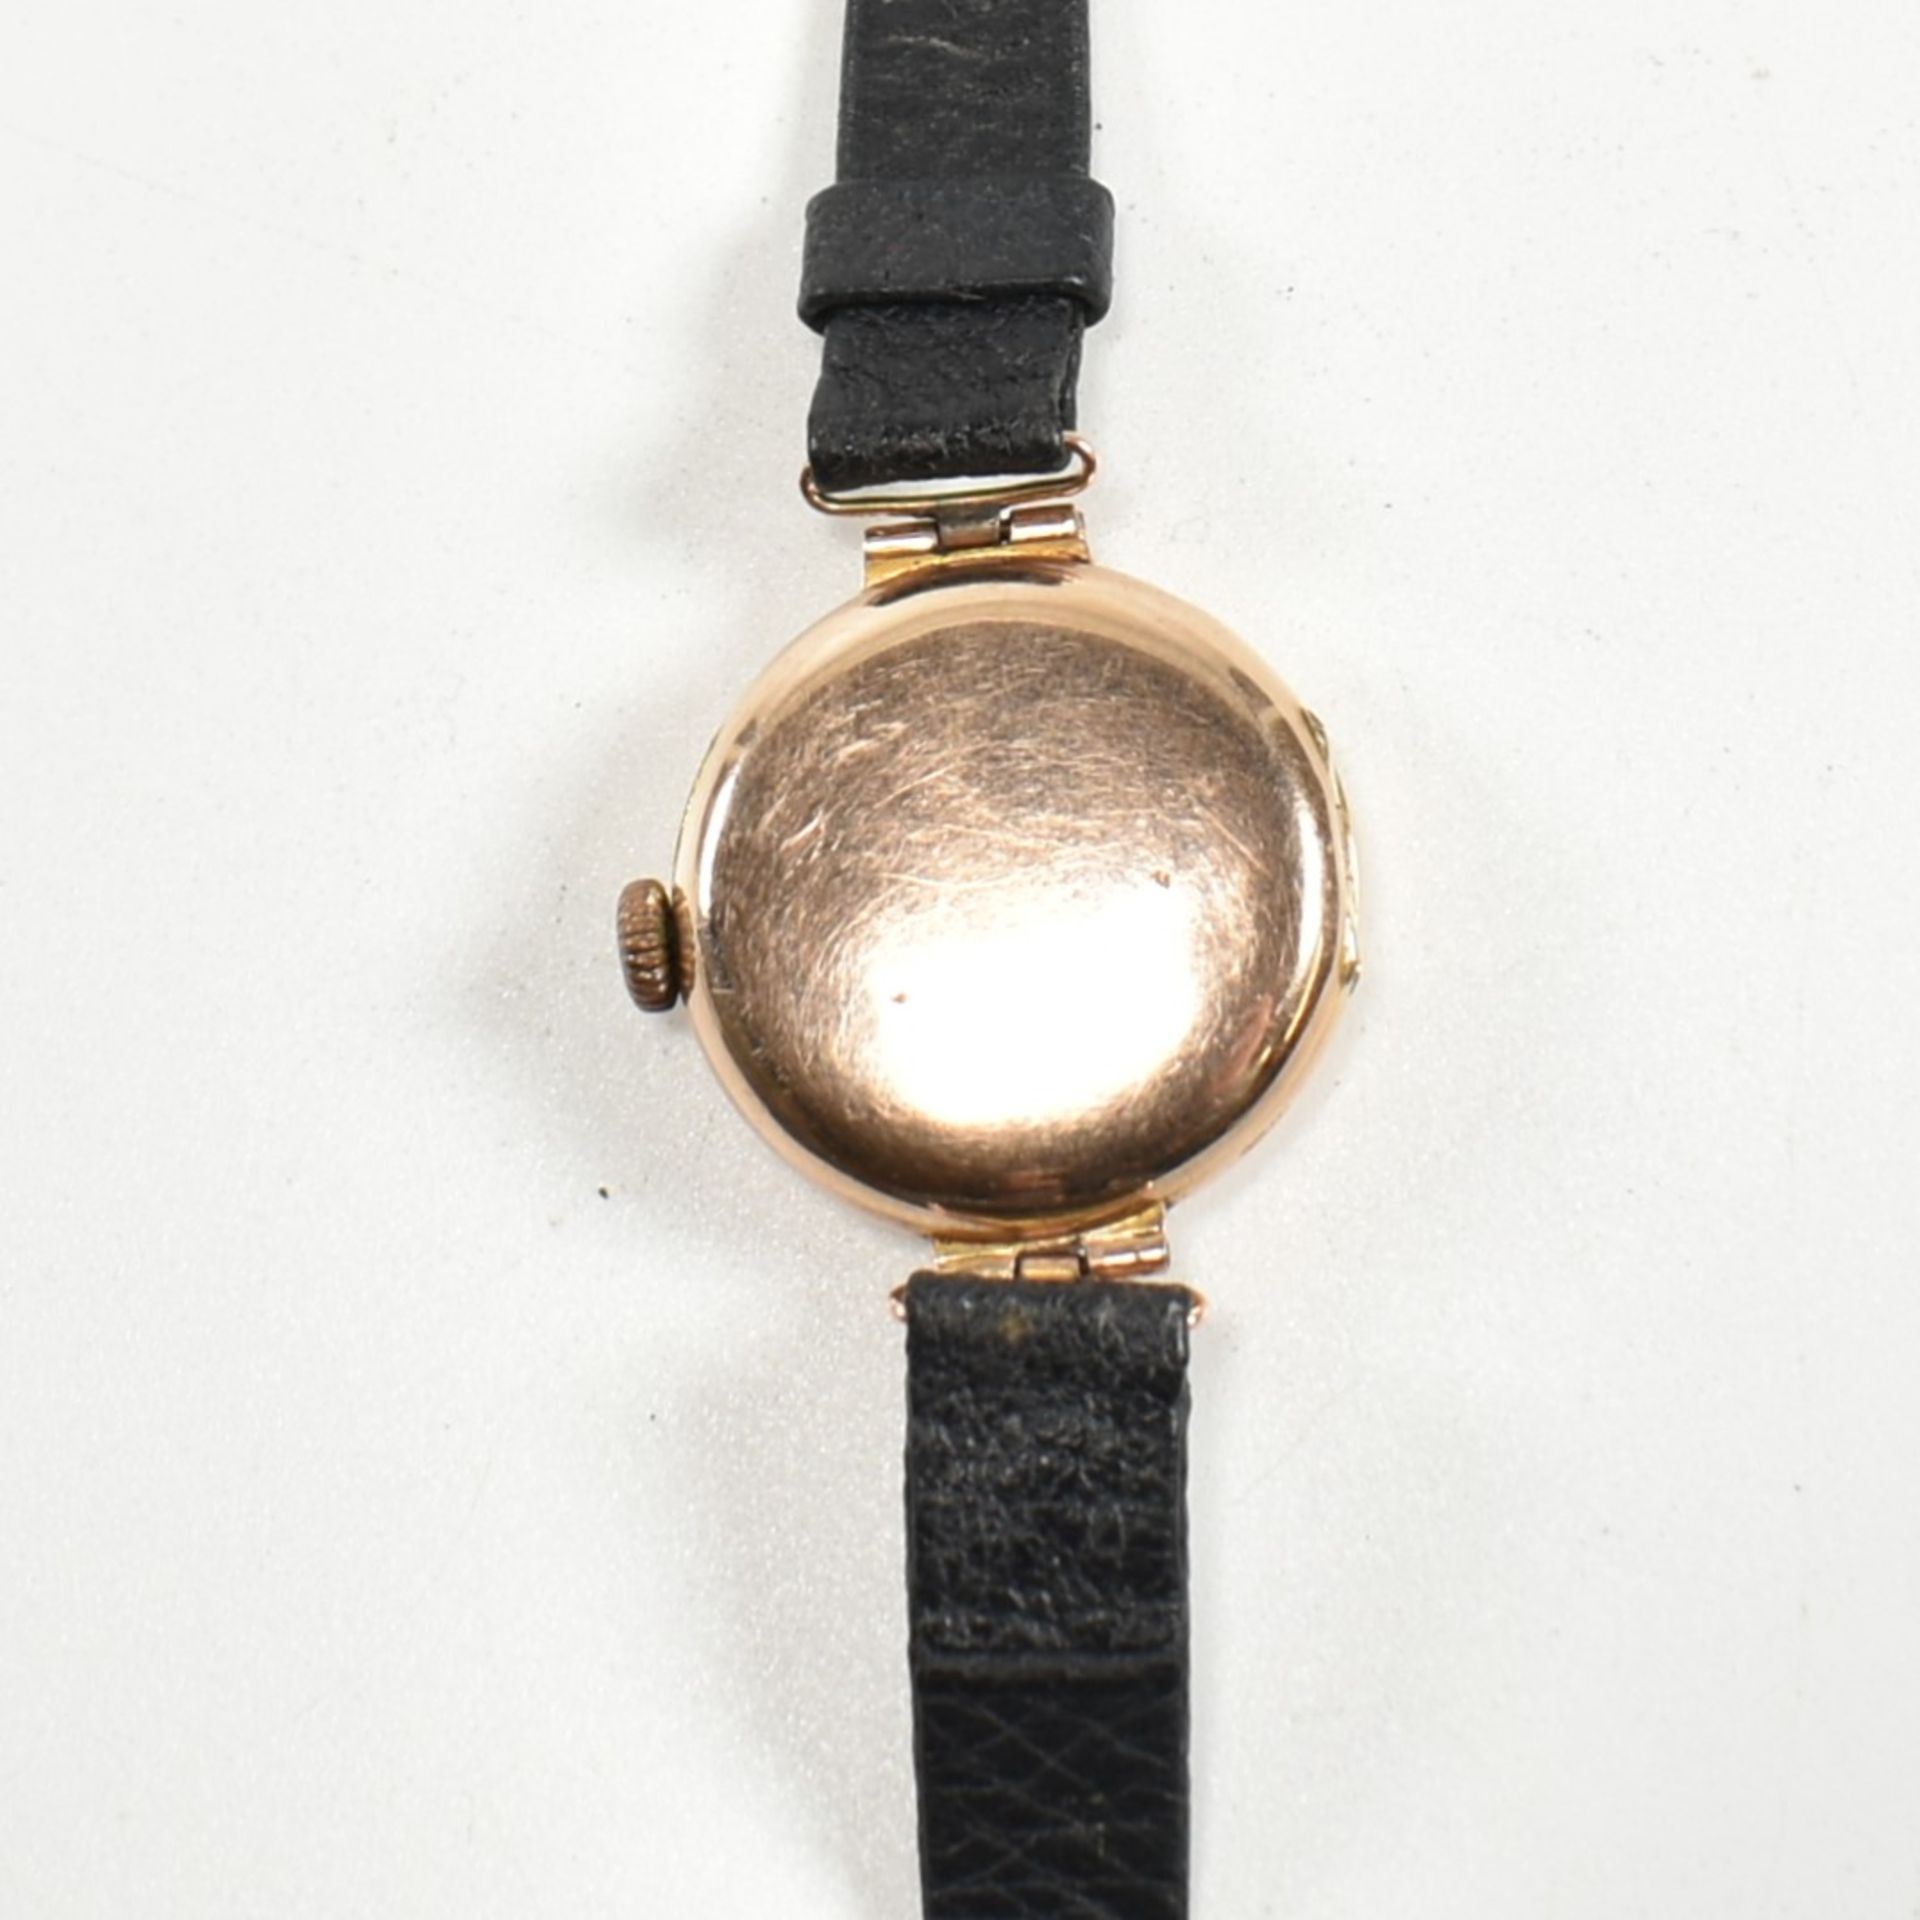 HALLMARKED 9CT GOLD WRISTWATCH WITH LEATHER STRAP - Image 3 of 6